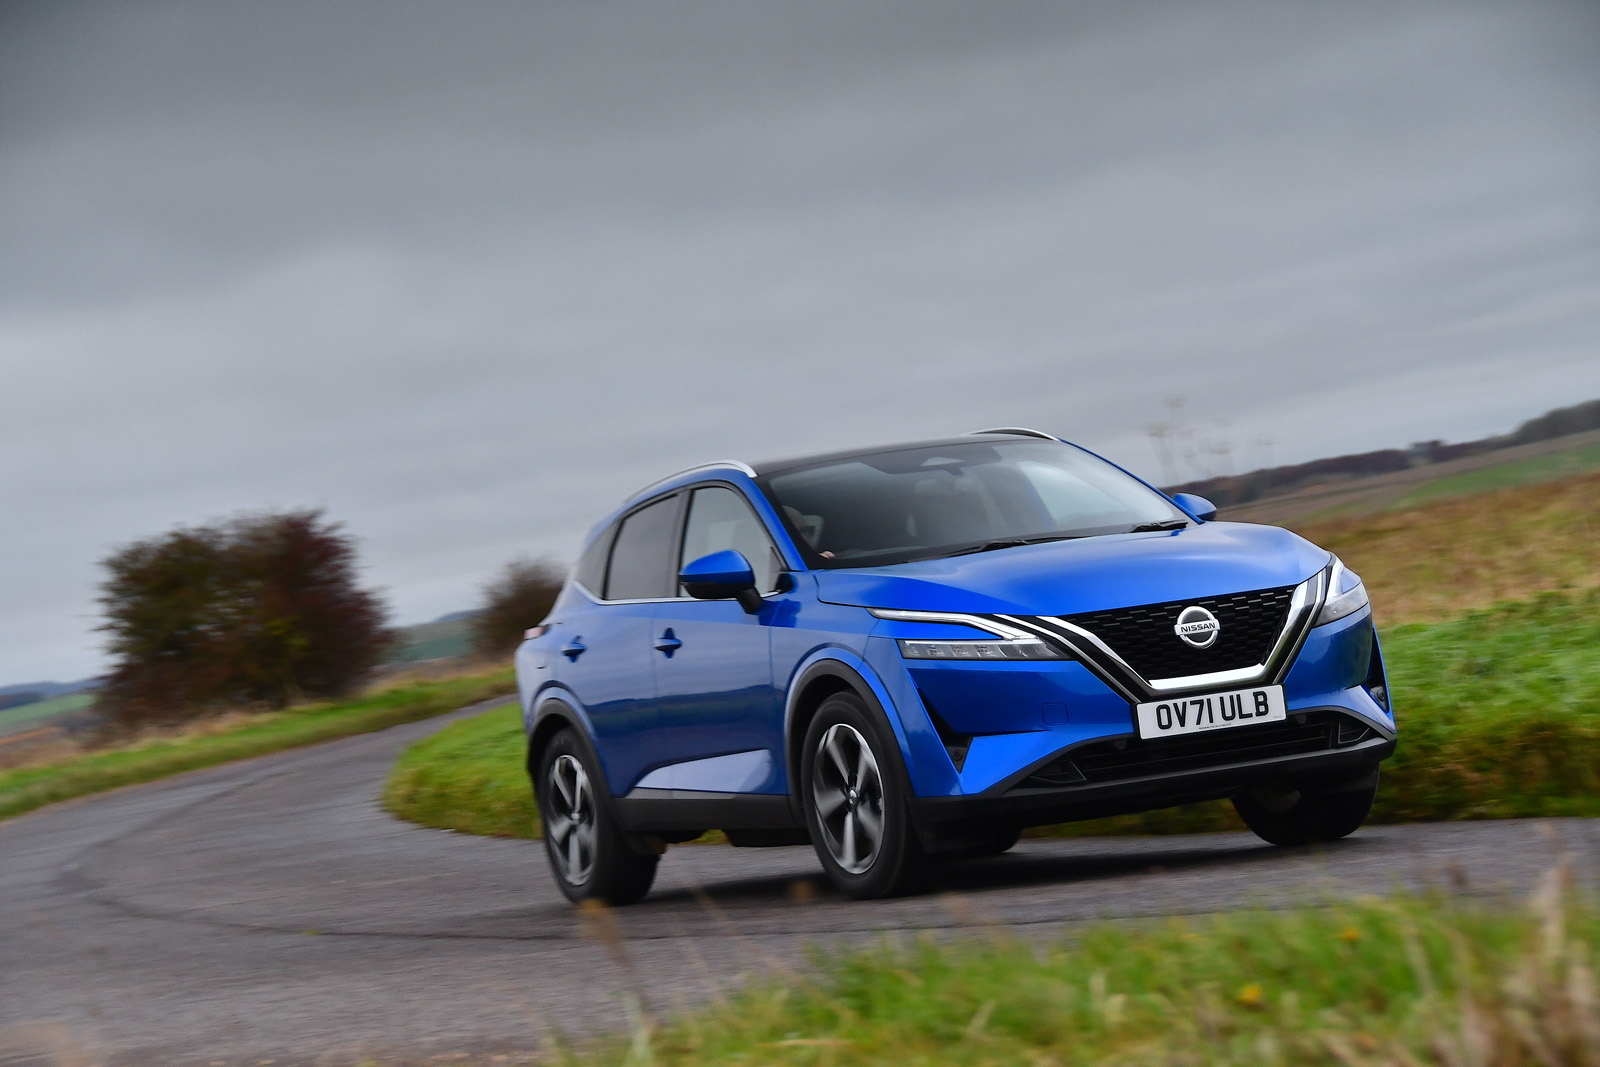 AD] Nissan Qashqai review: is it the right family car for you?